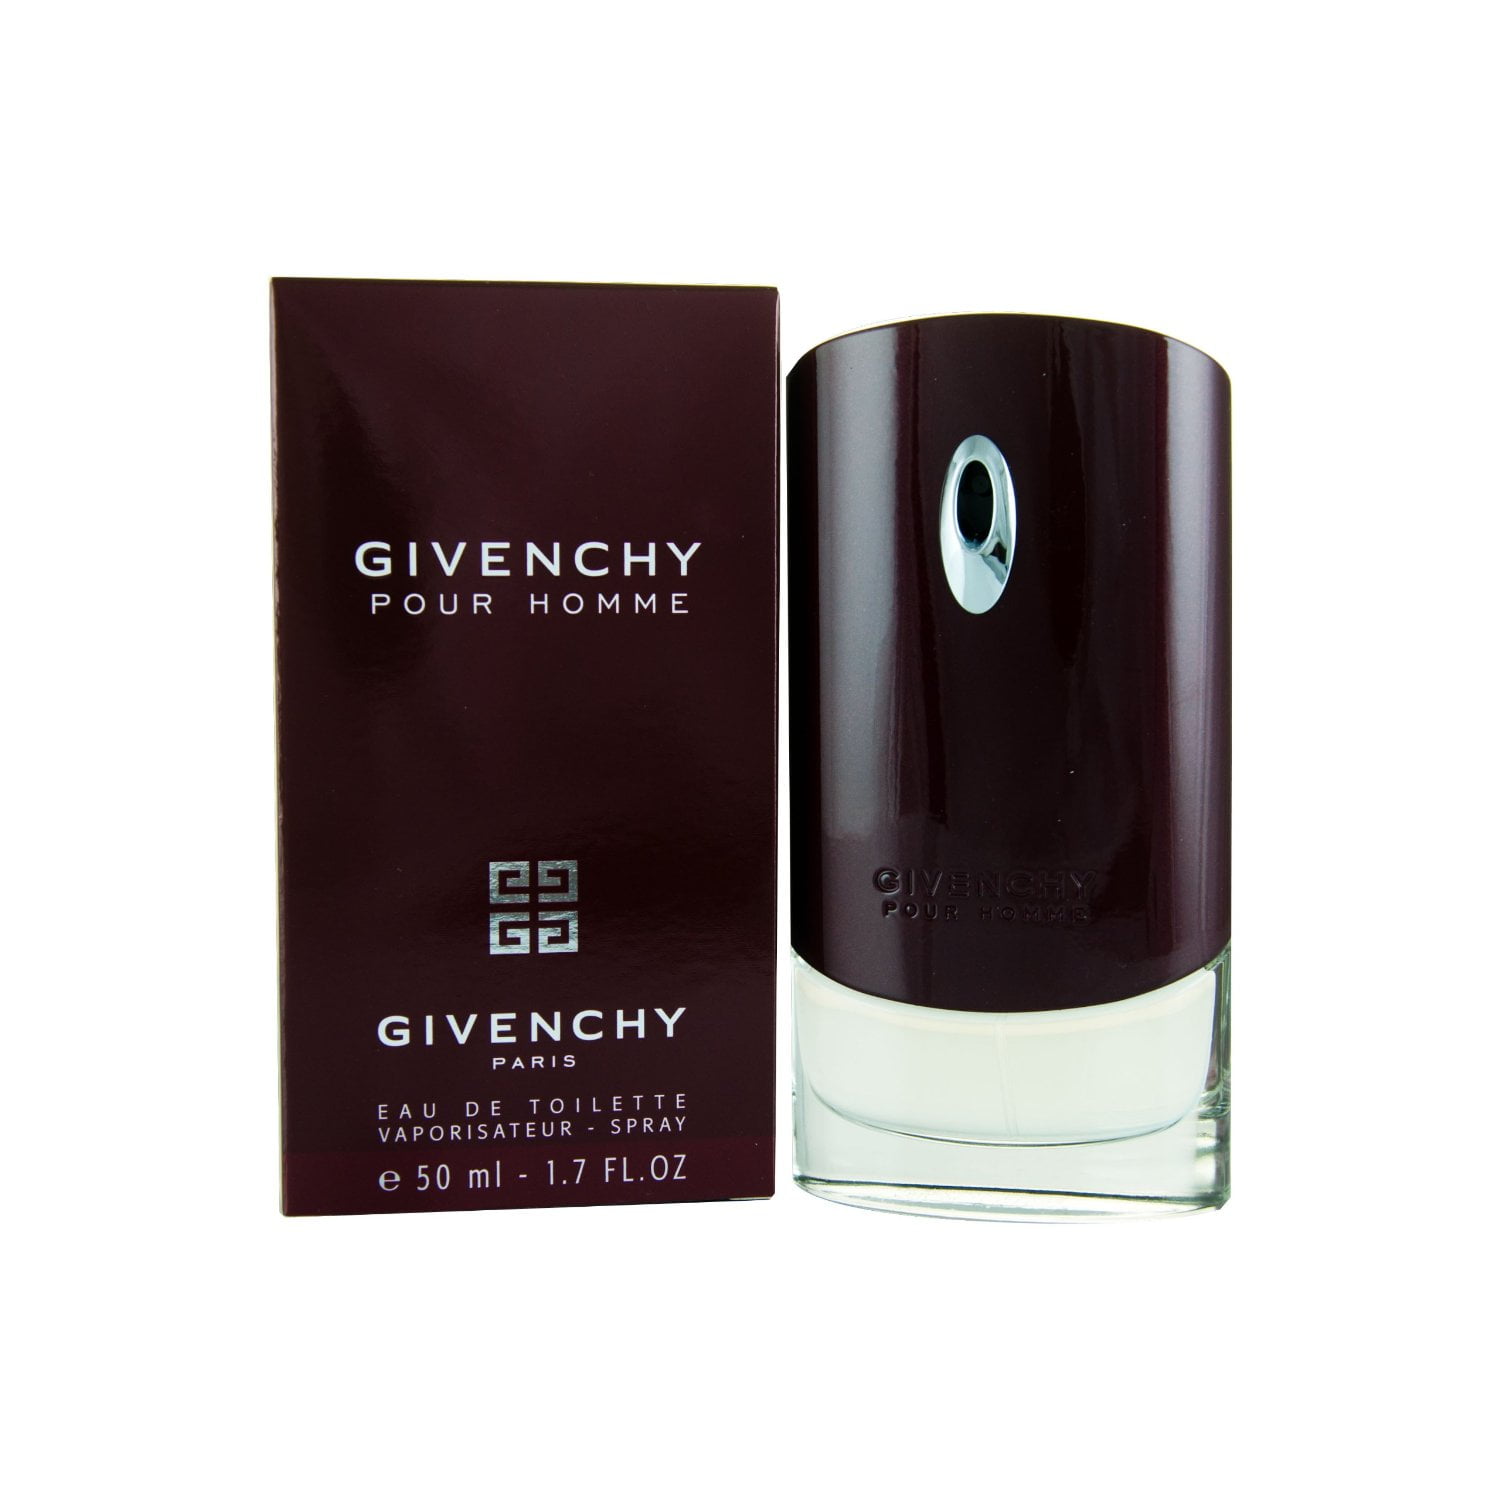 Givenchy pour homme оригинал. Givenchy pour homme 50ml EDT. Живанши pour homme 50 мл. Givenchy pour homme Givenchy. G-001 Givenchy pour homme.